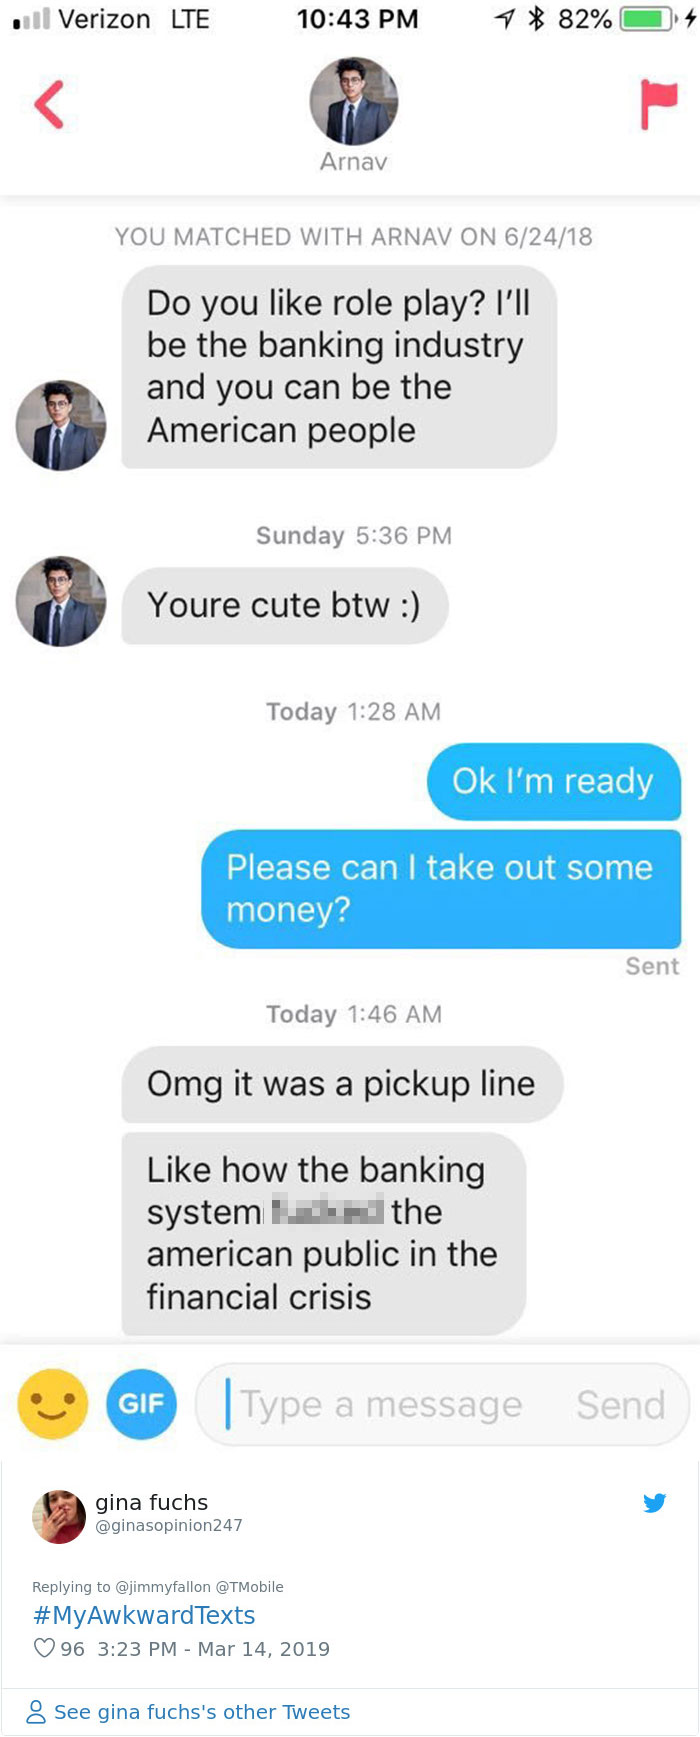 awkward text messages - ull Verizon Lte 1 82% 4 Arnav You Matched With Arnav On 62418 Do you role play? I'll be the banking industry and you can be the American people Sunday Youre cute btw Today Ok I'm ready Please can I take out some money? Sent Today O